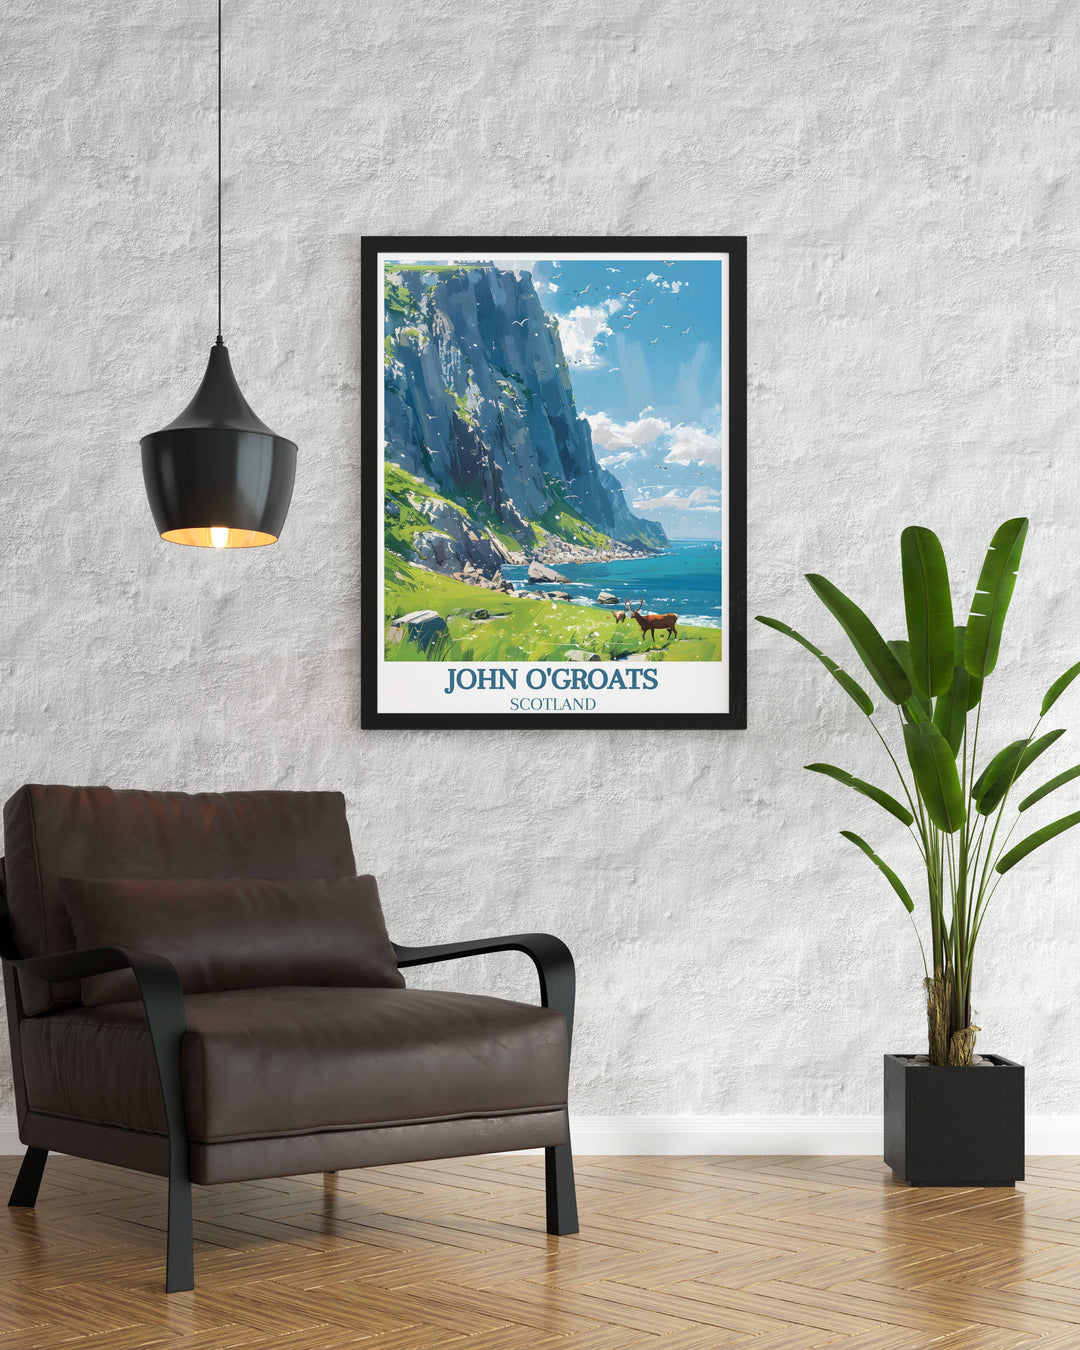 Scottish Highlands Signpost framed print capturing the essence of the rugged and beautiful Scottish landscapes. This piece is a must have for any nature enthusiasts collection, adding inspiration and elegance to your space.